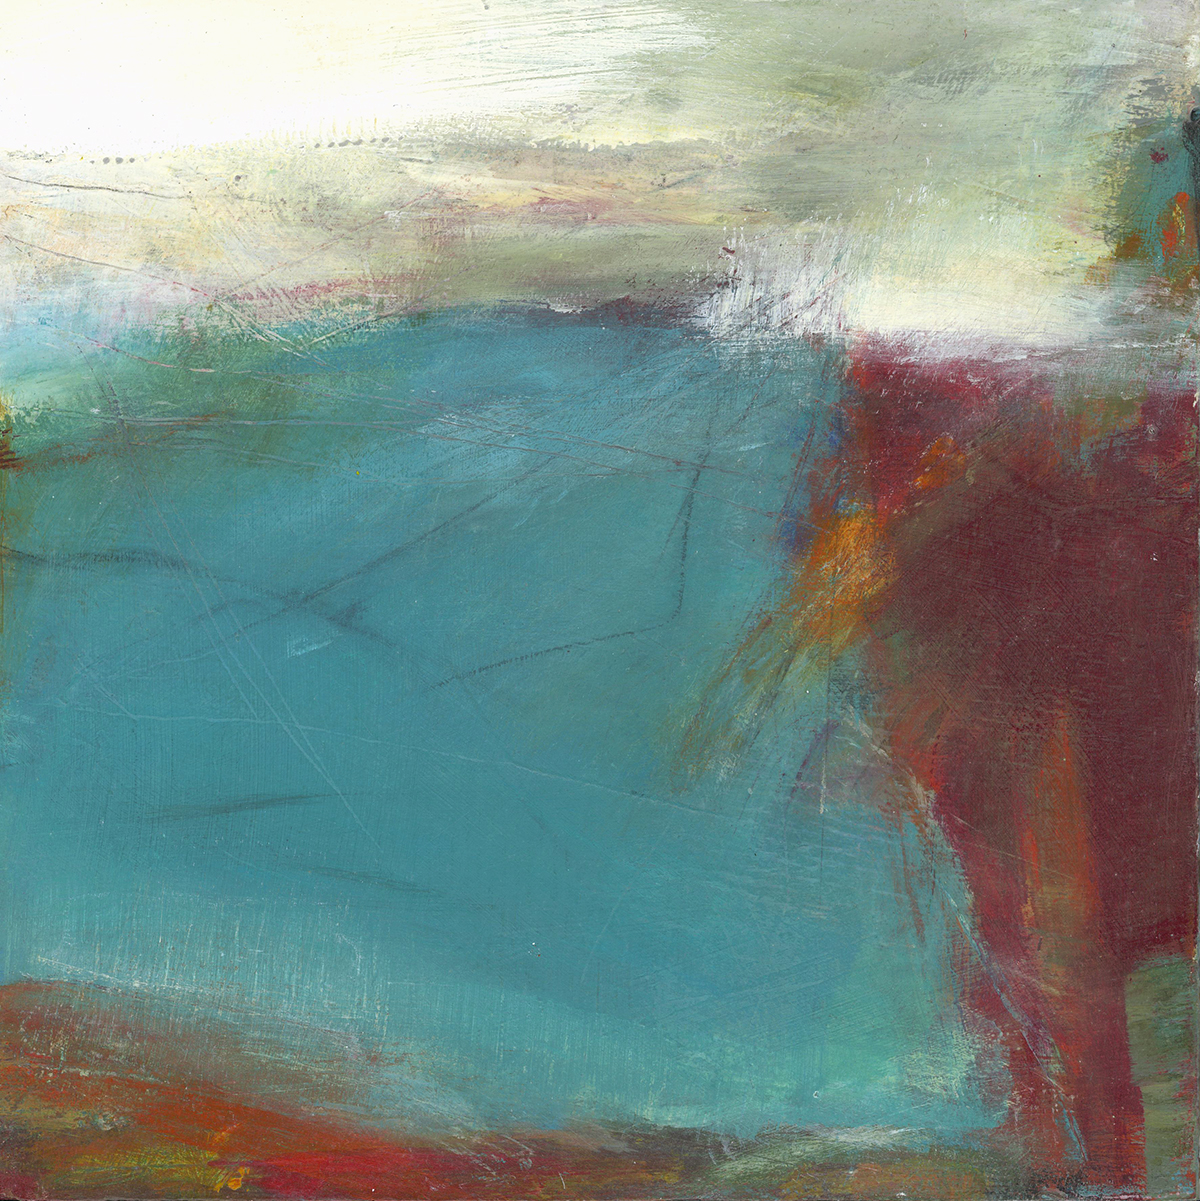 Turquoise and muted reds and orange make up this small but dramatic landscape.